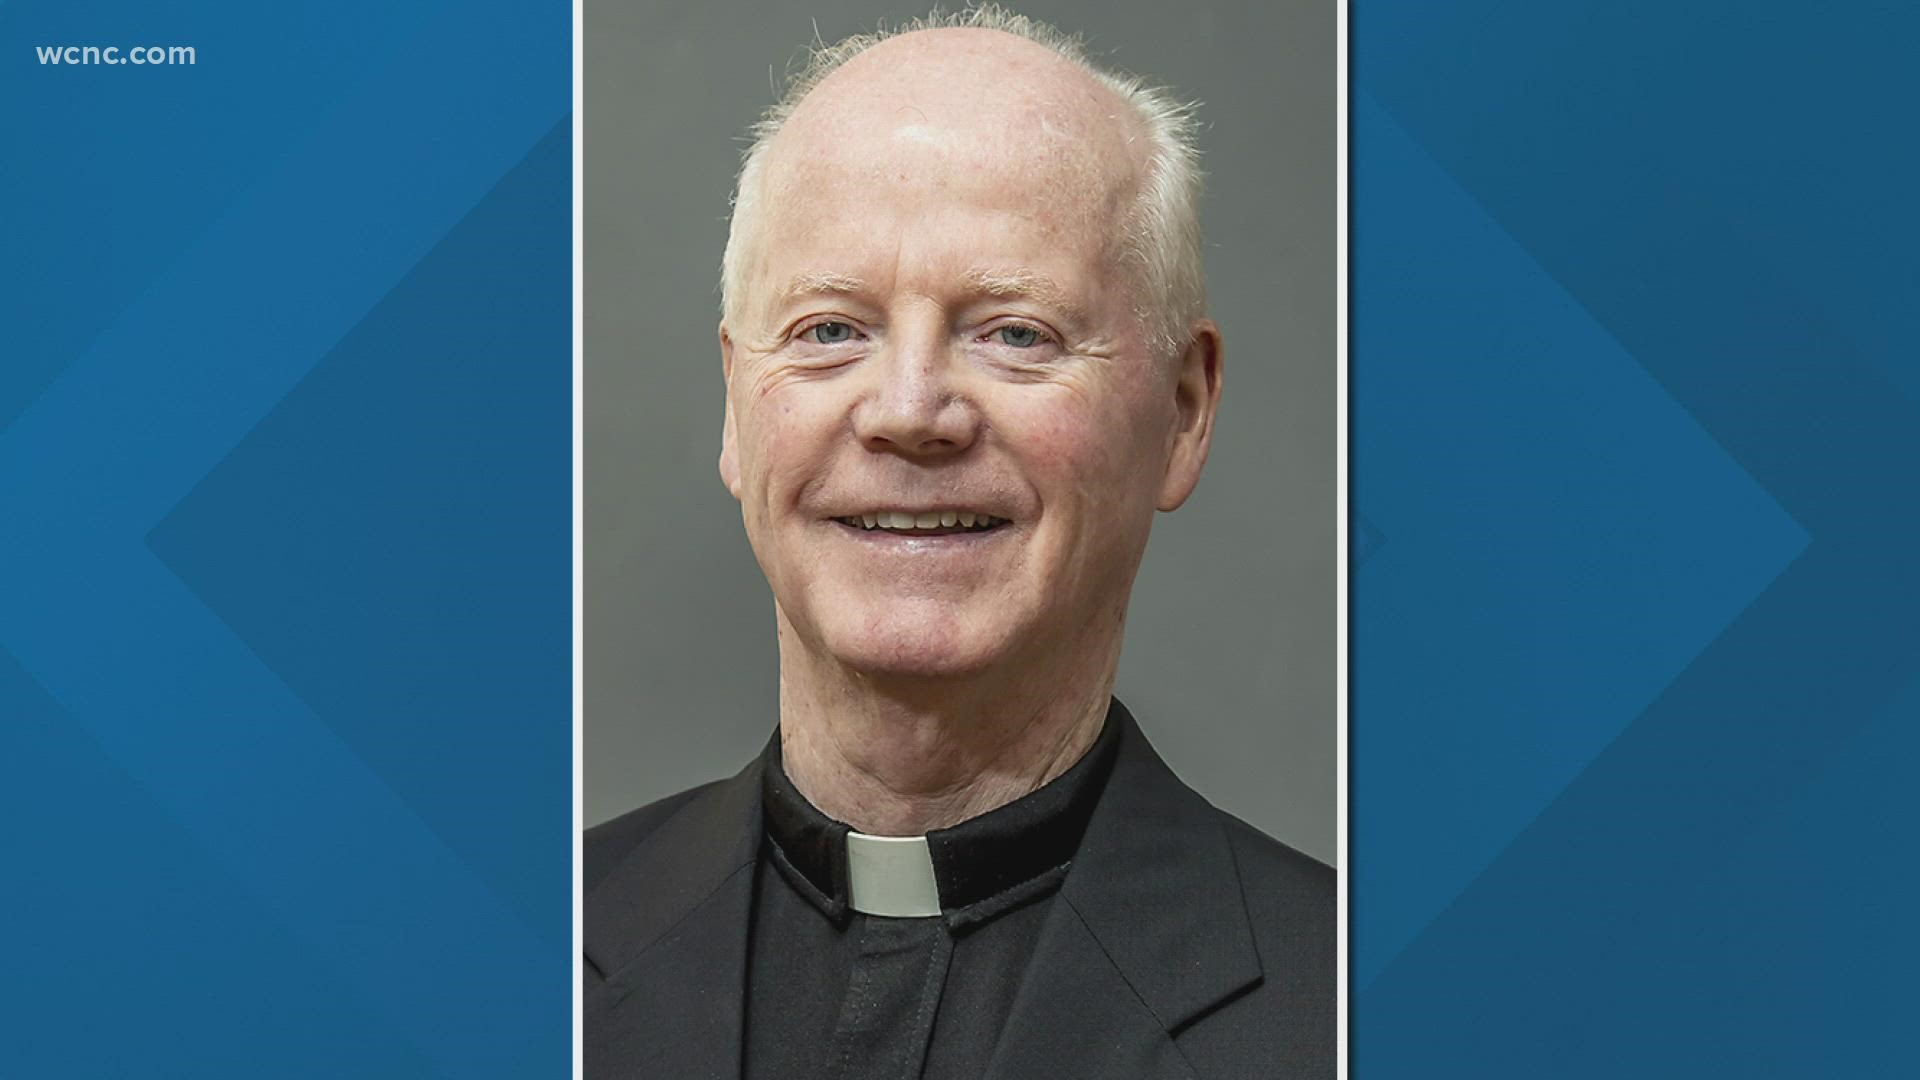 A former Charlotte priest, now 79-years-old, faces an allegation of child sexual abuse dating back 20 years.